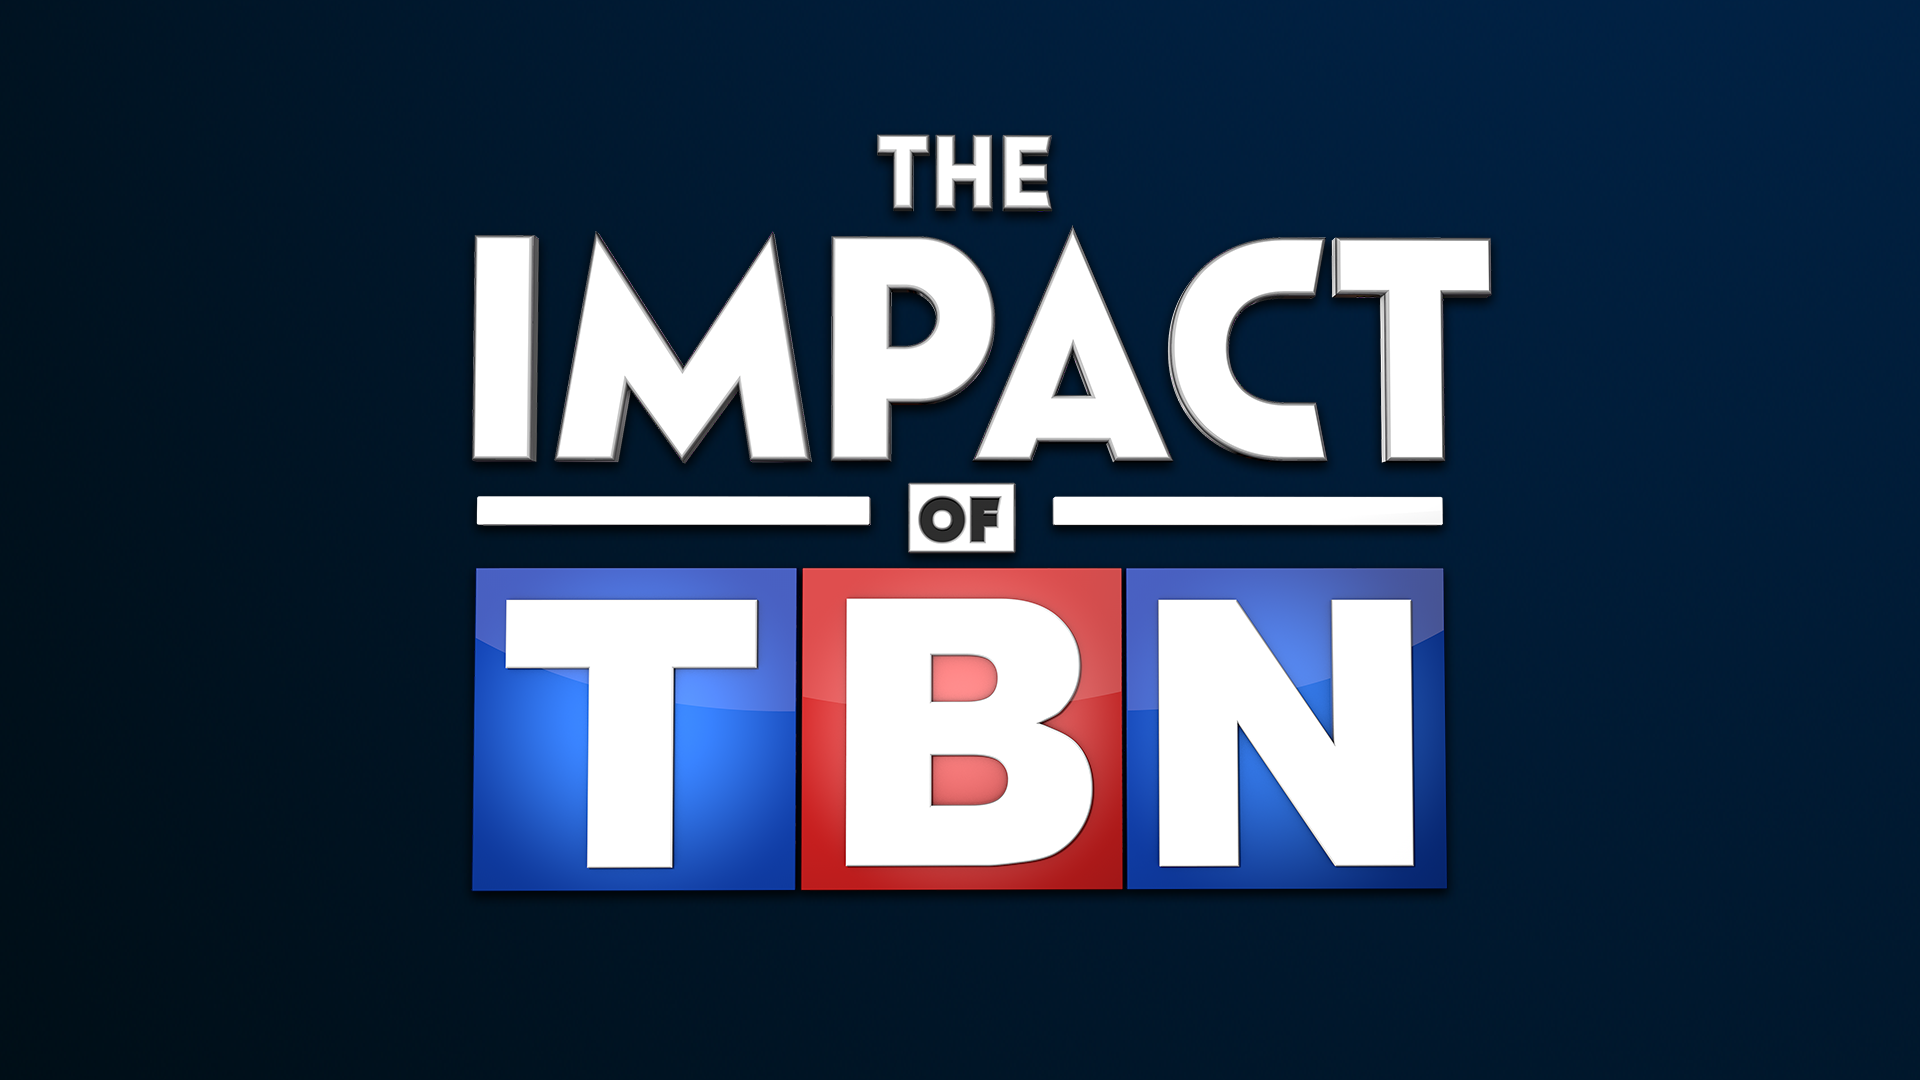 The Impact of TBN